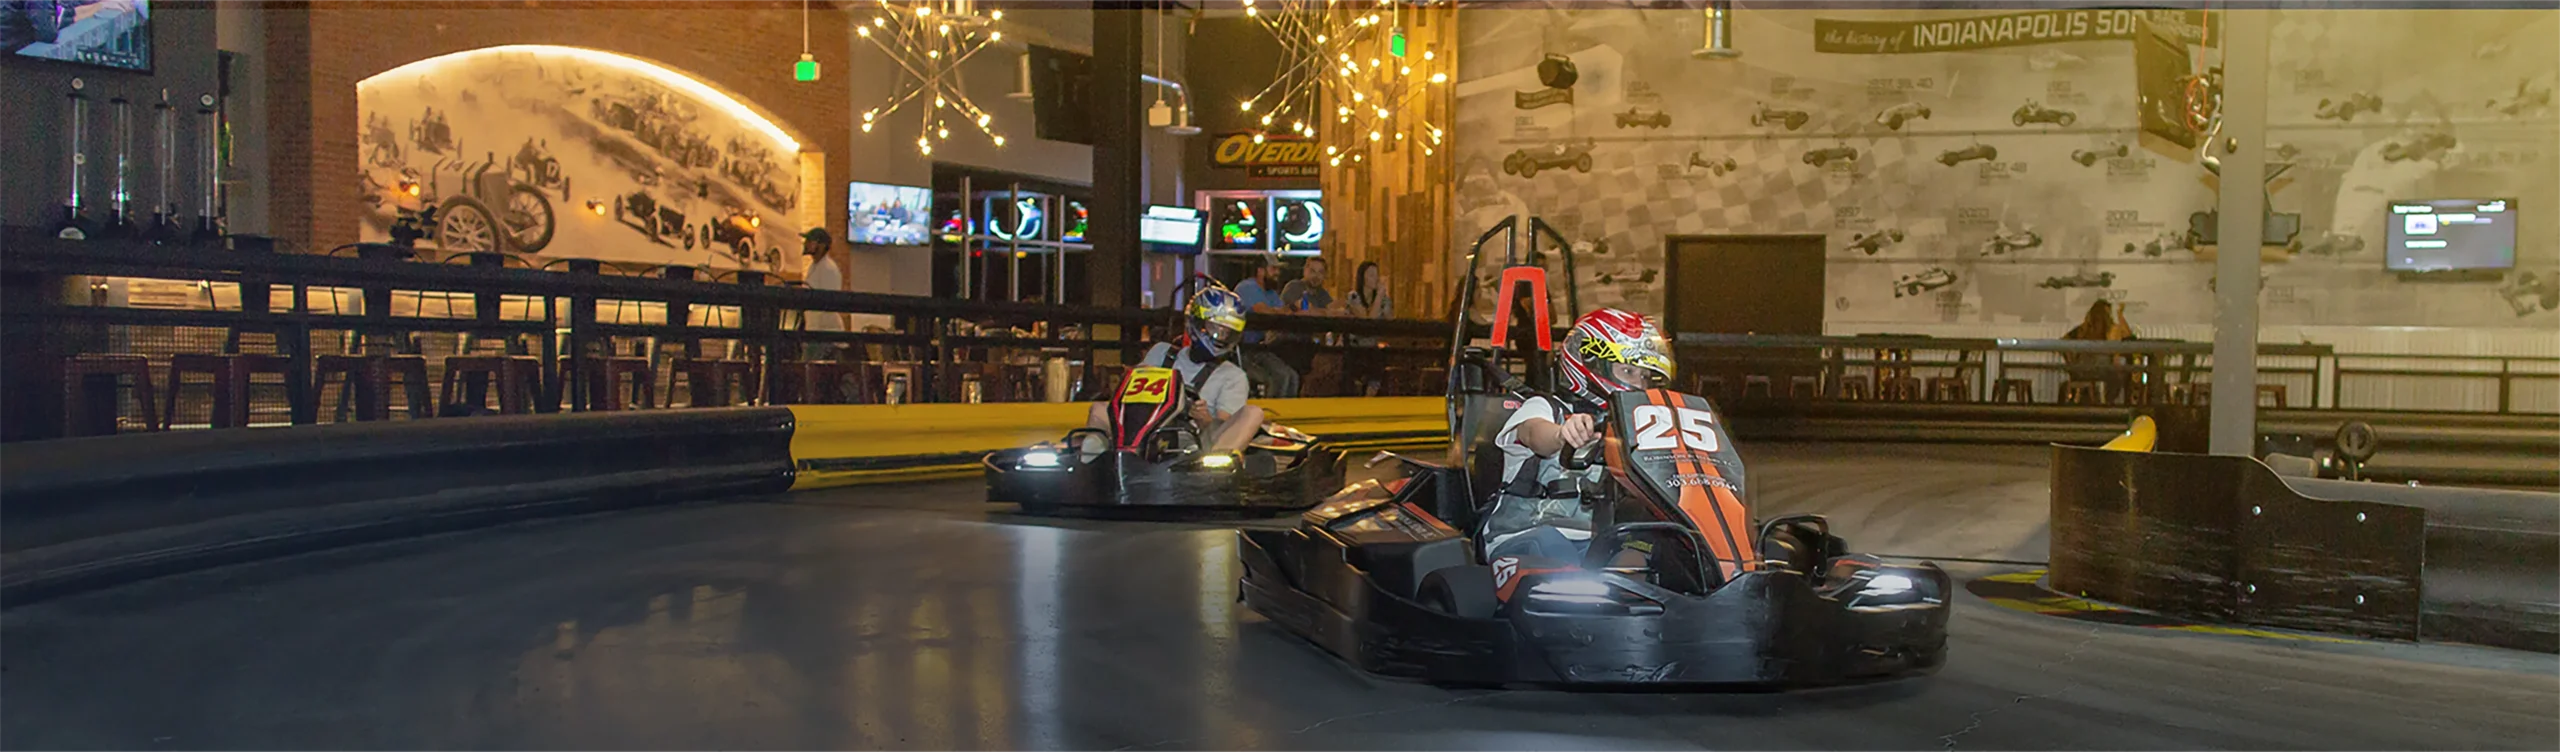 A banner image of gokart racers on an indoor track